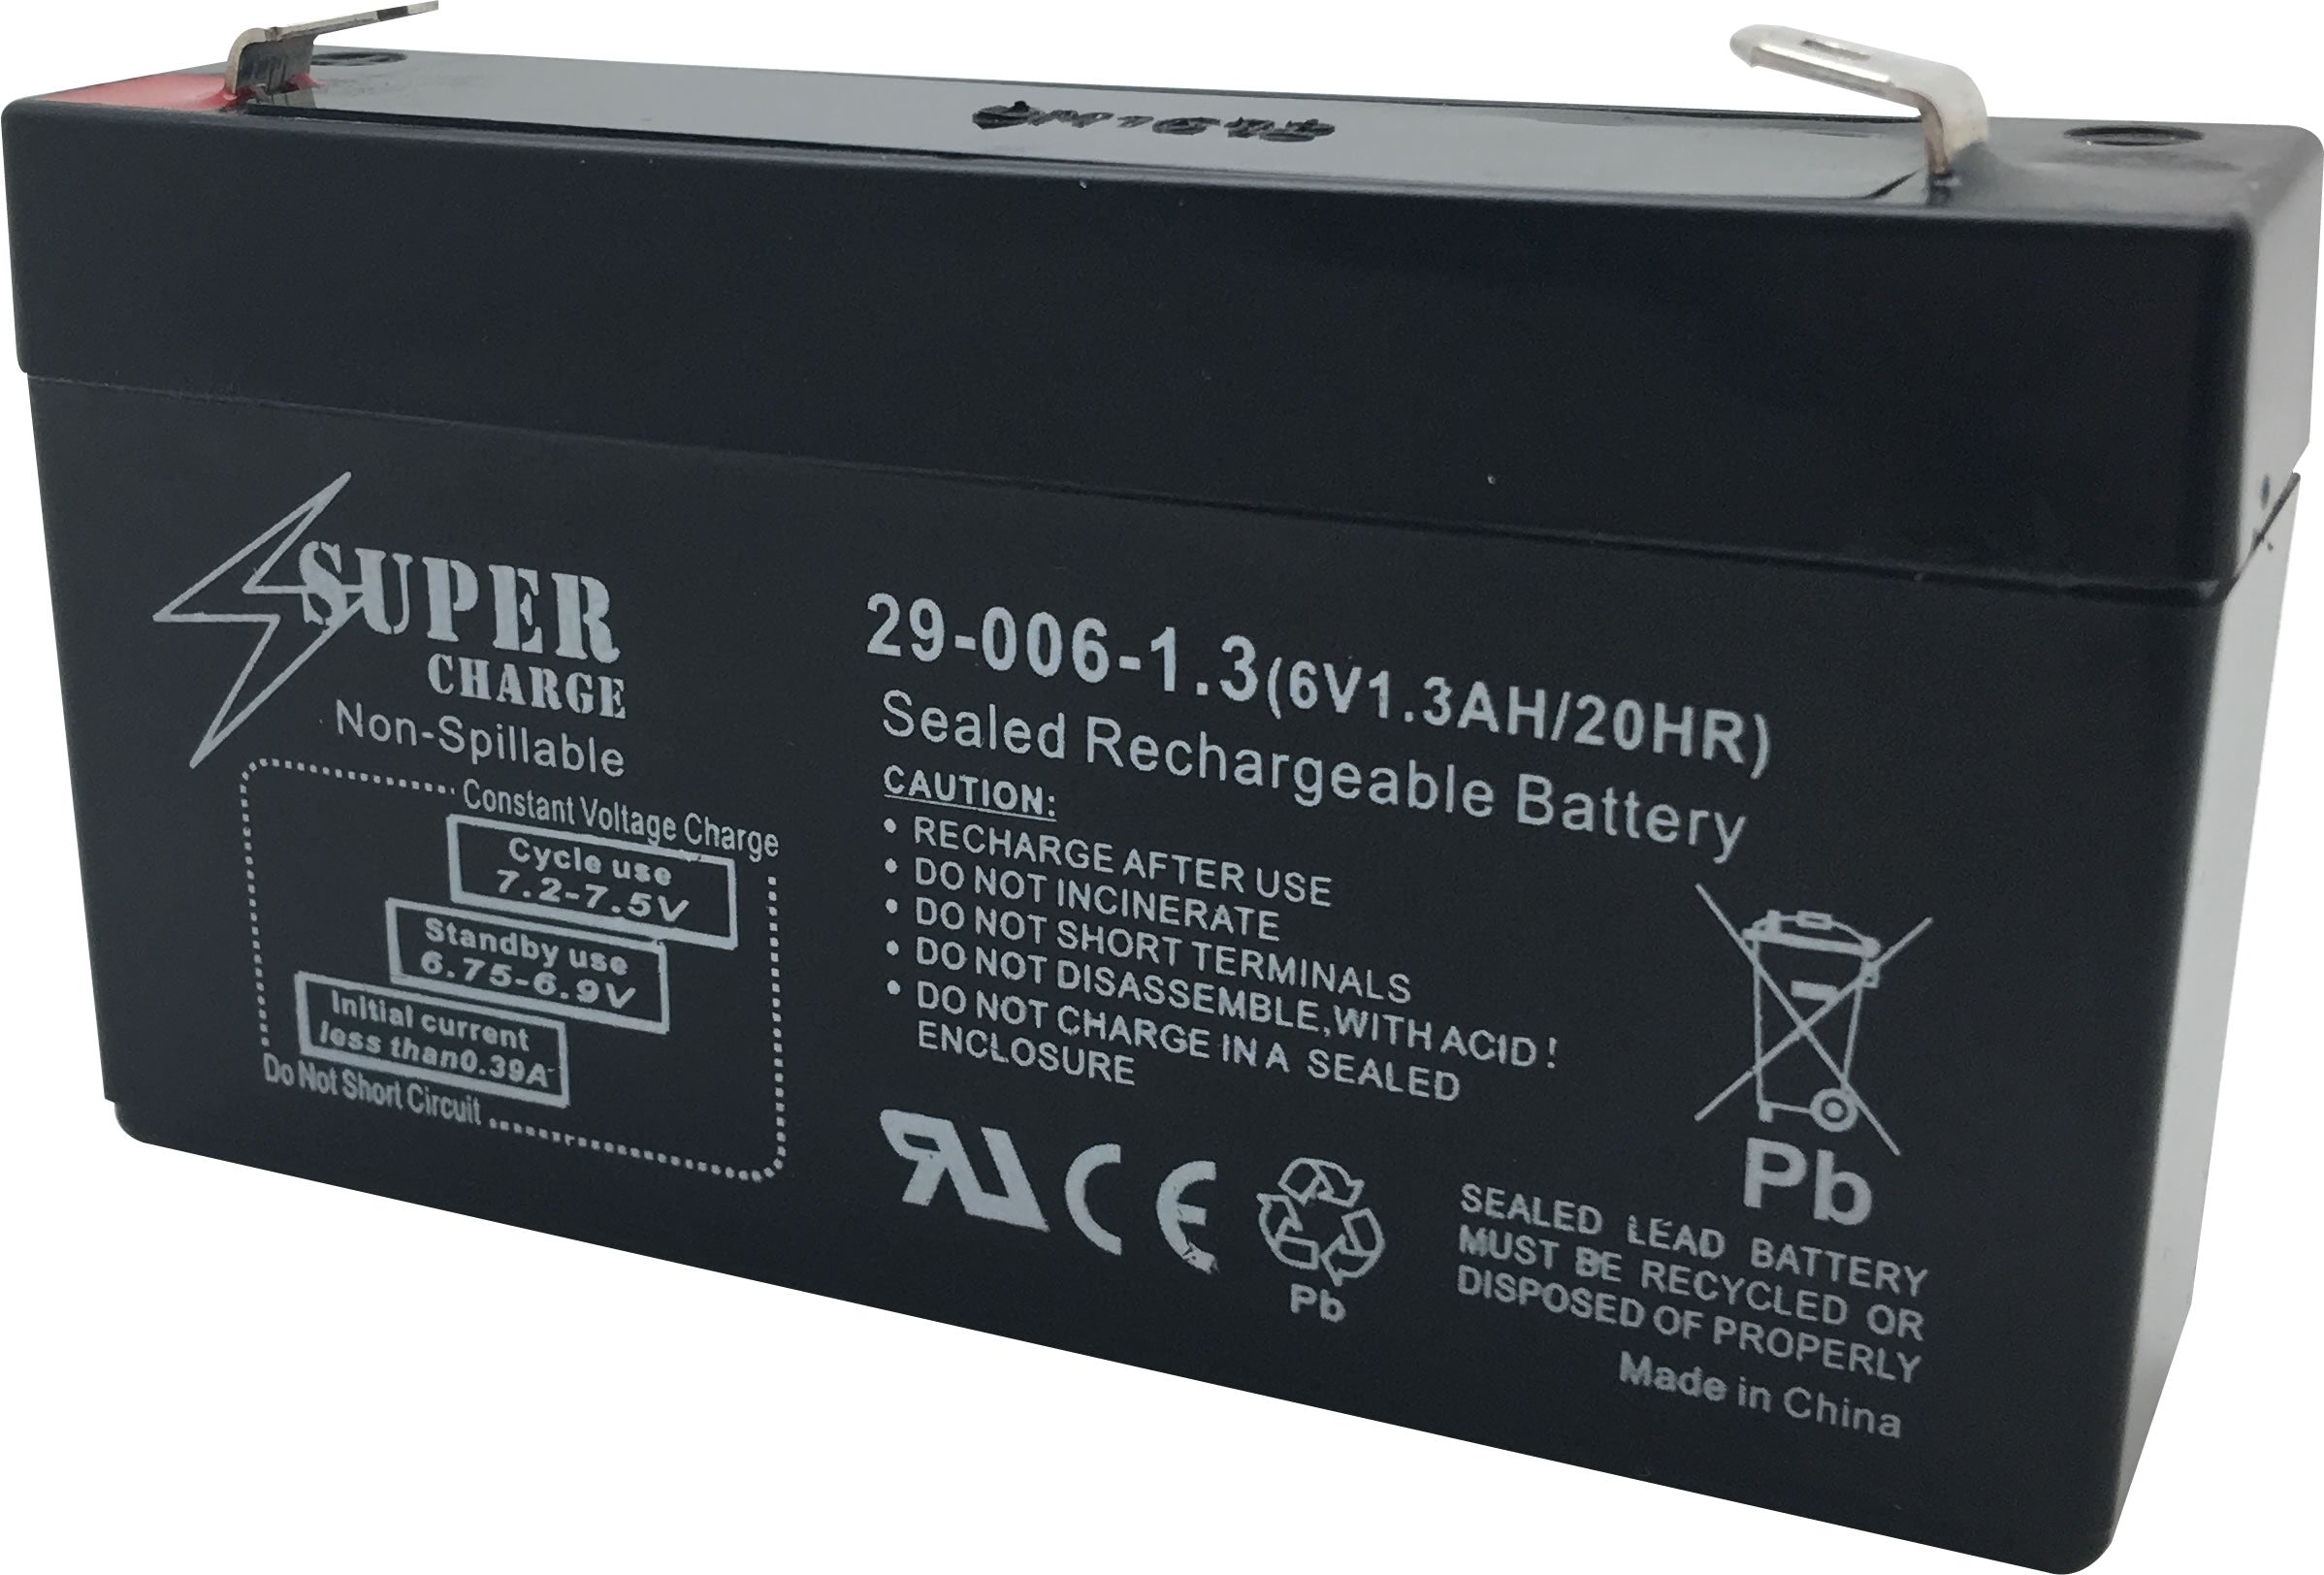 29-006-1.3 Rechargeable Battery 6V 1.3AH 20HR